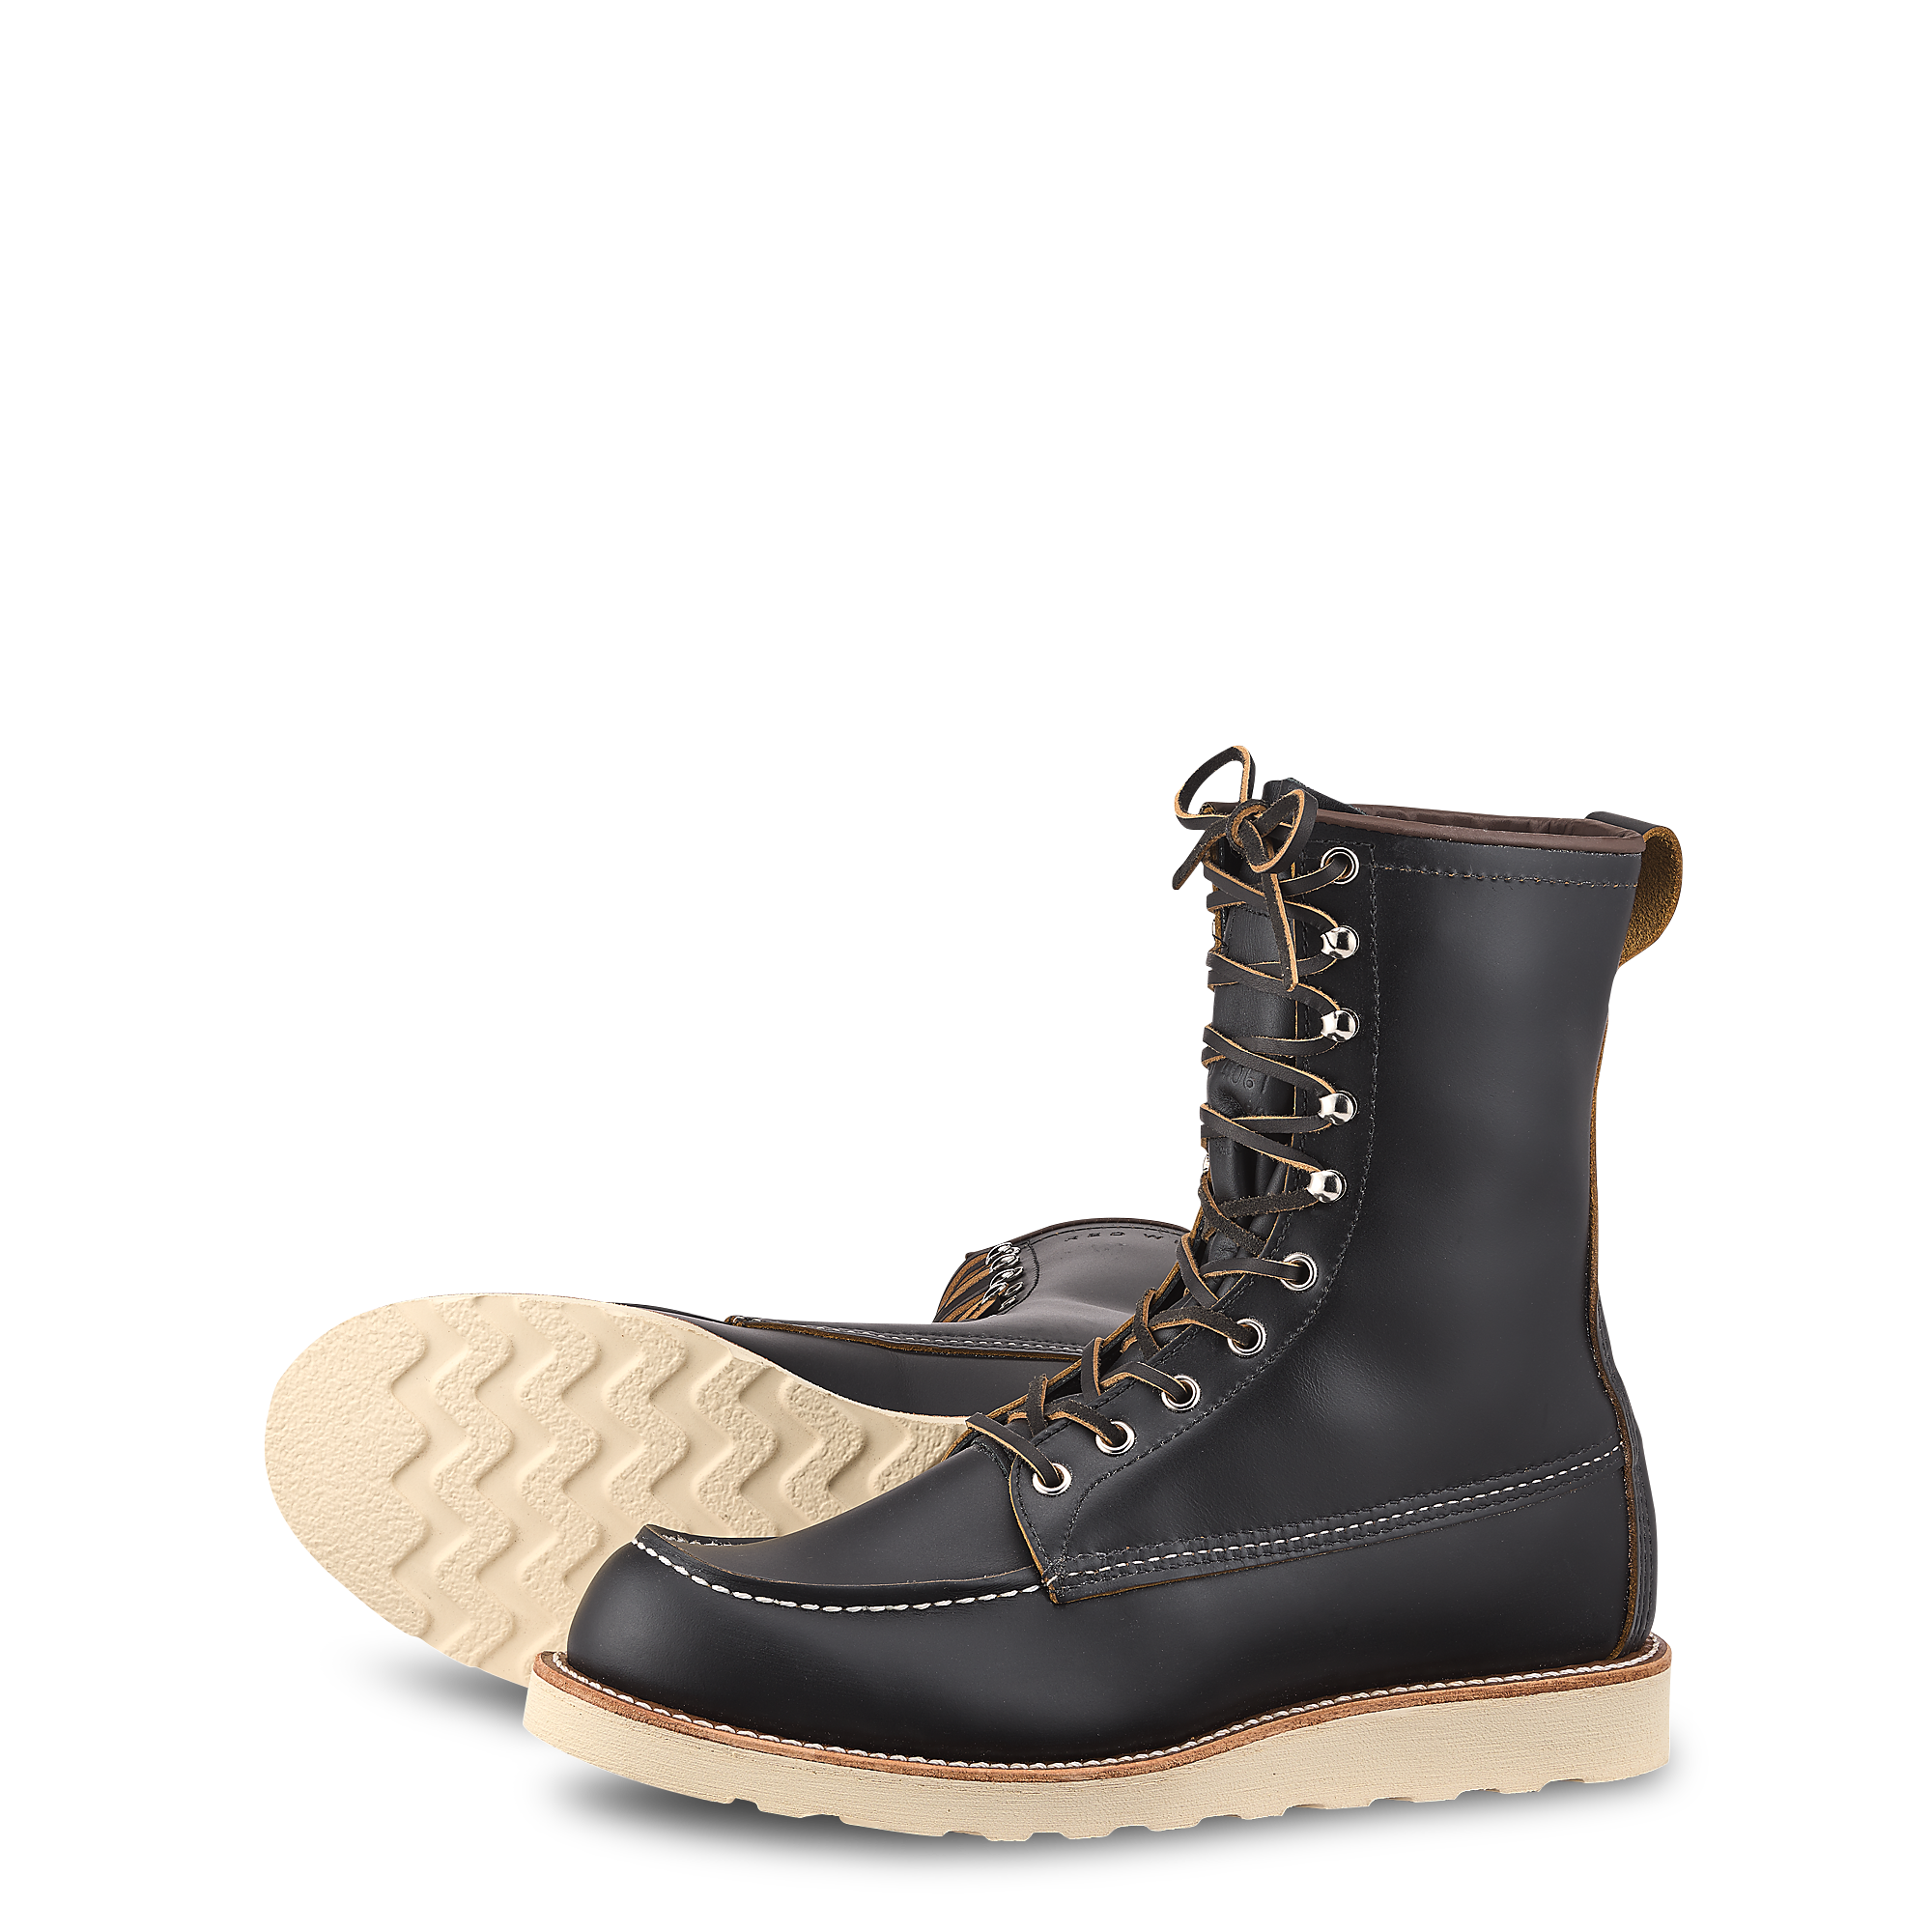 red wing 8 inch moc